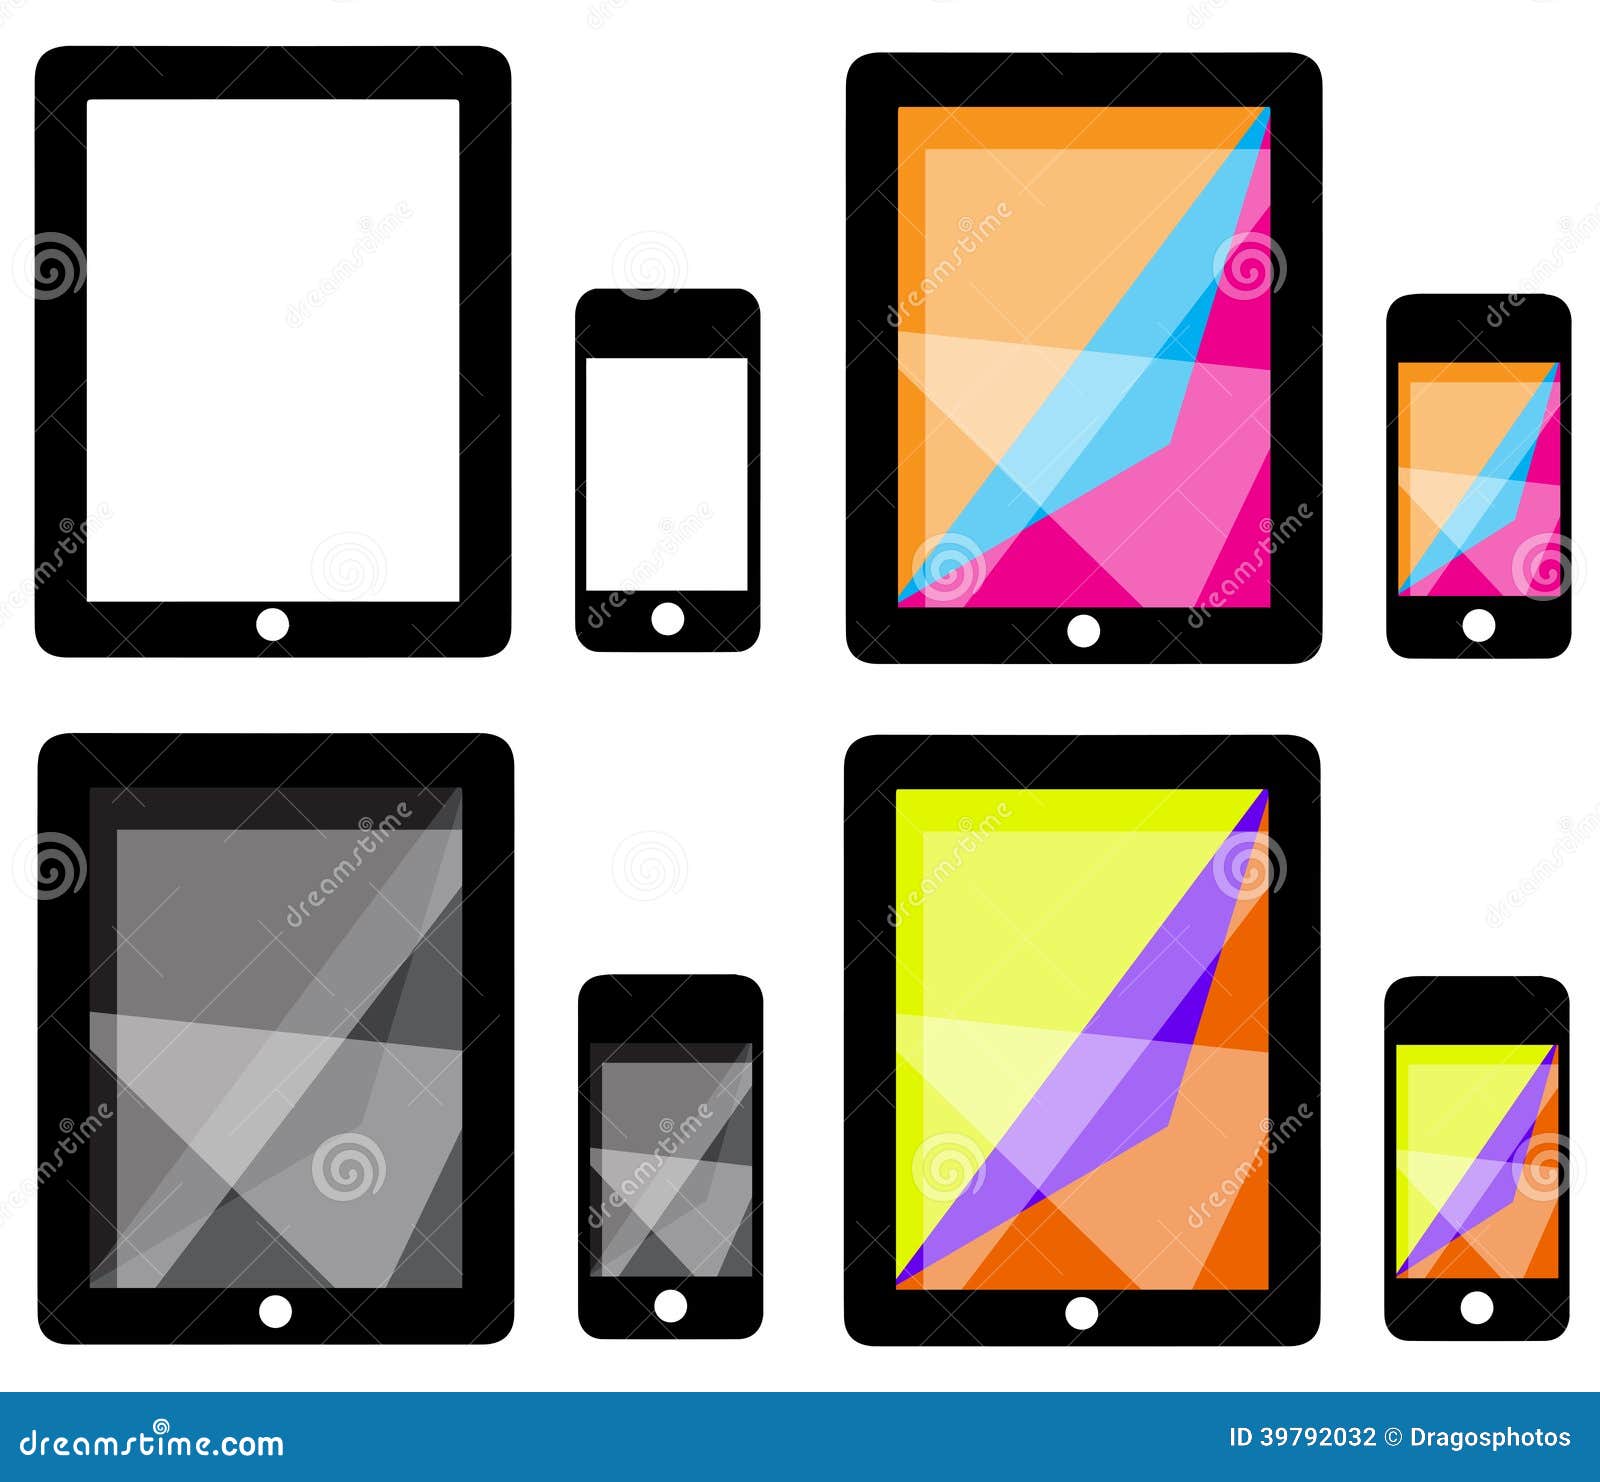 download clipart to ipad - photo #23